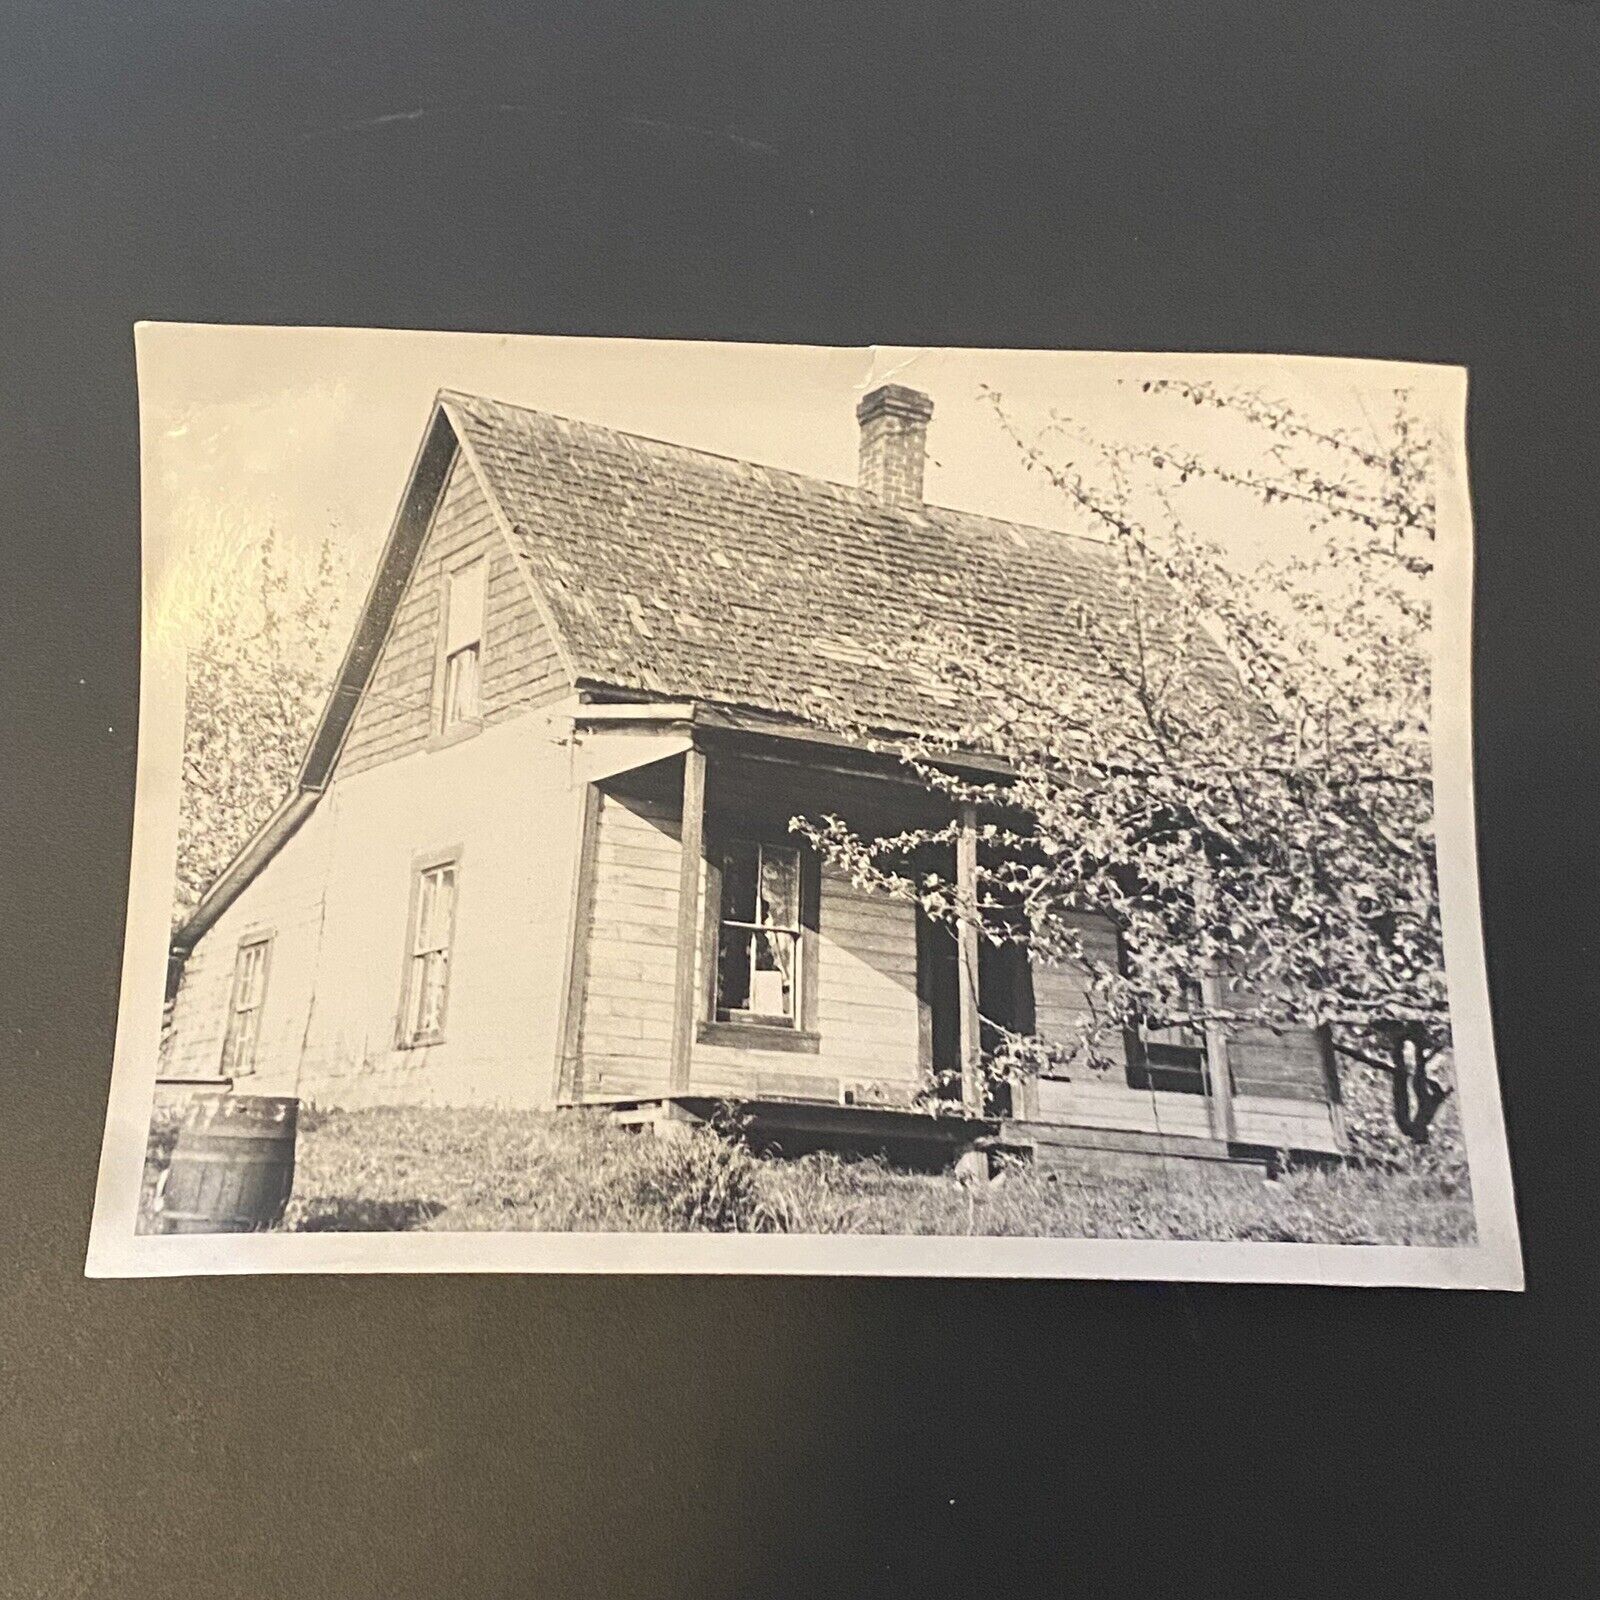 VTG Photo 5x7 Classic Western Two Story House Wood Shingles Porch Trees